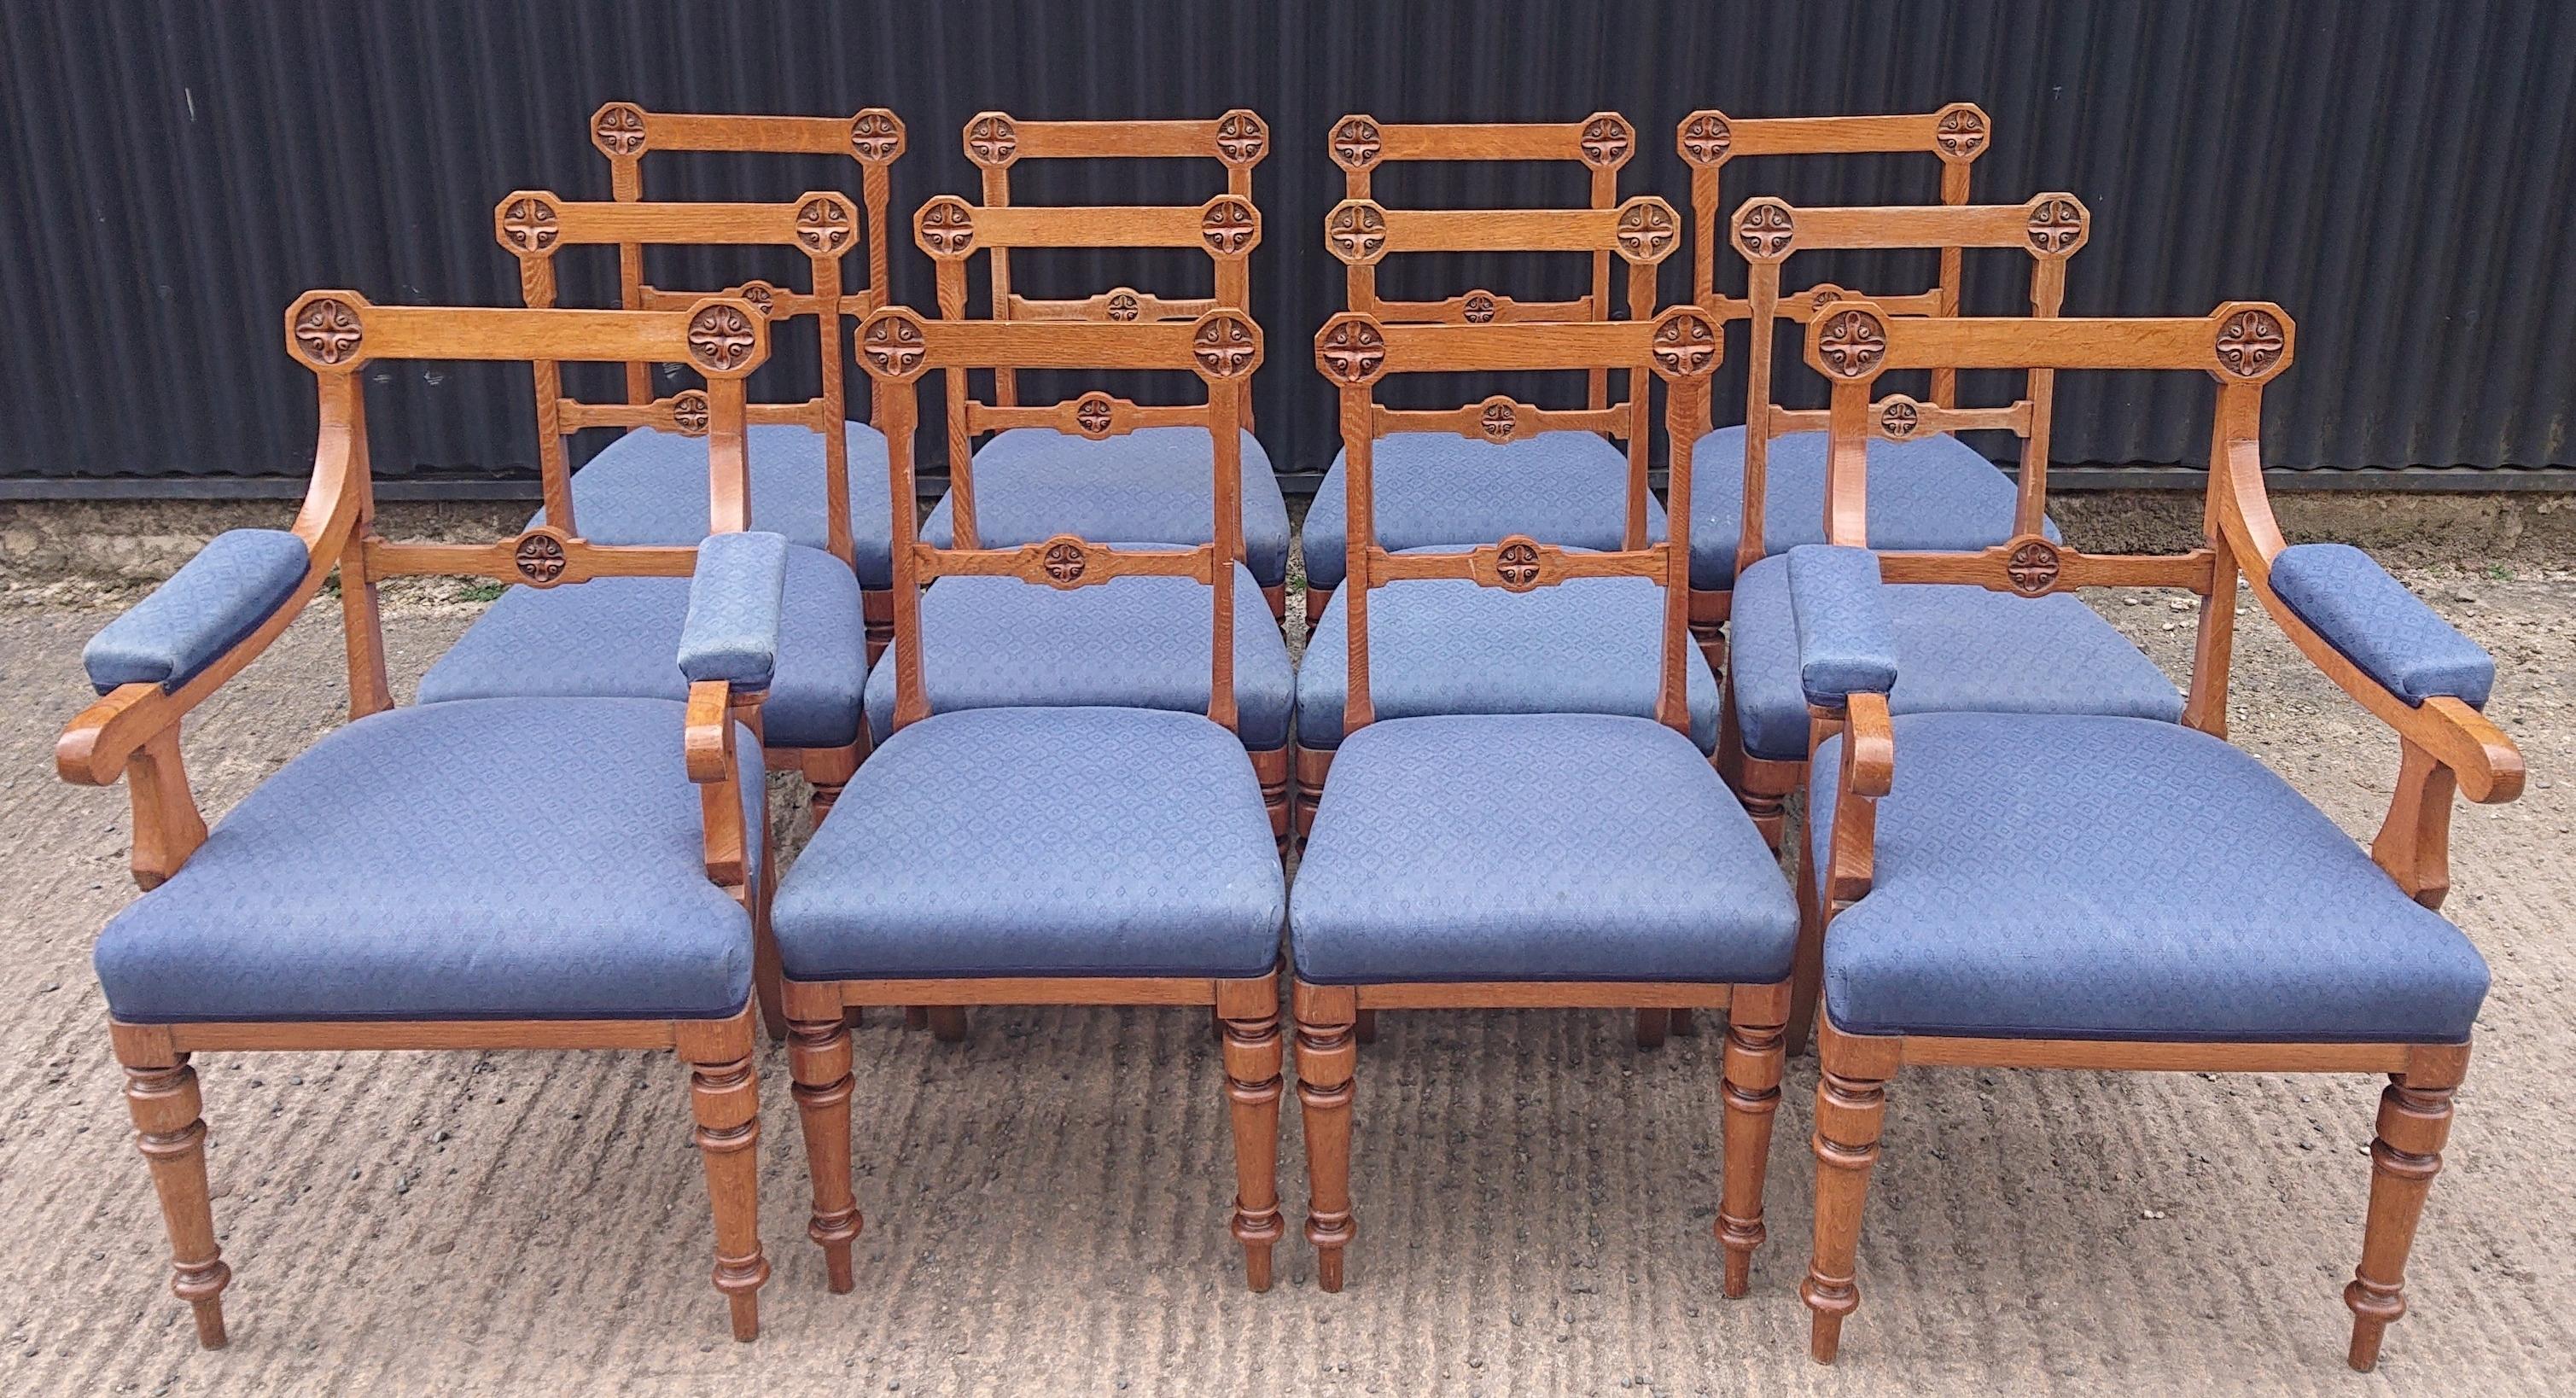 Great quality set of antique dining chairs made by Lamb of Manchester. These chairs are a good size, nicely proportioned, well made and with very finely carved decoration. The construction is tenon jointed with corner stretchers in the pre-Victorian